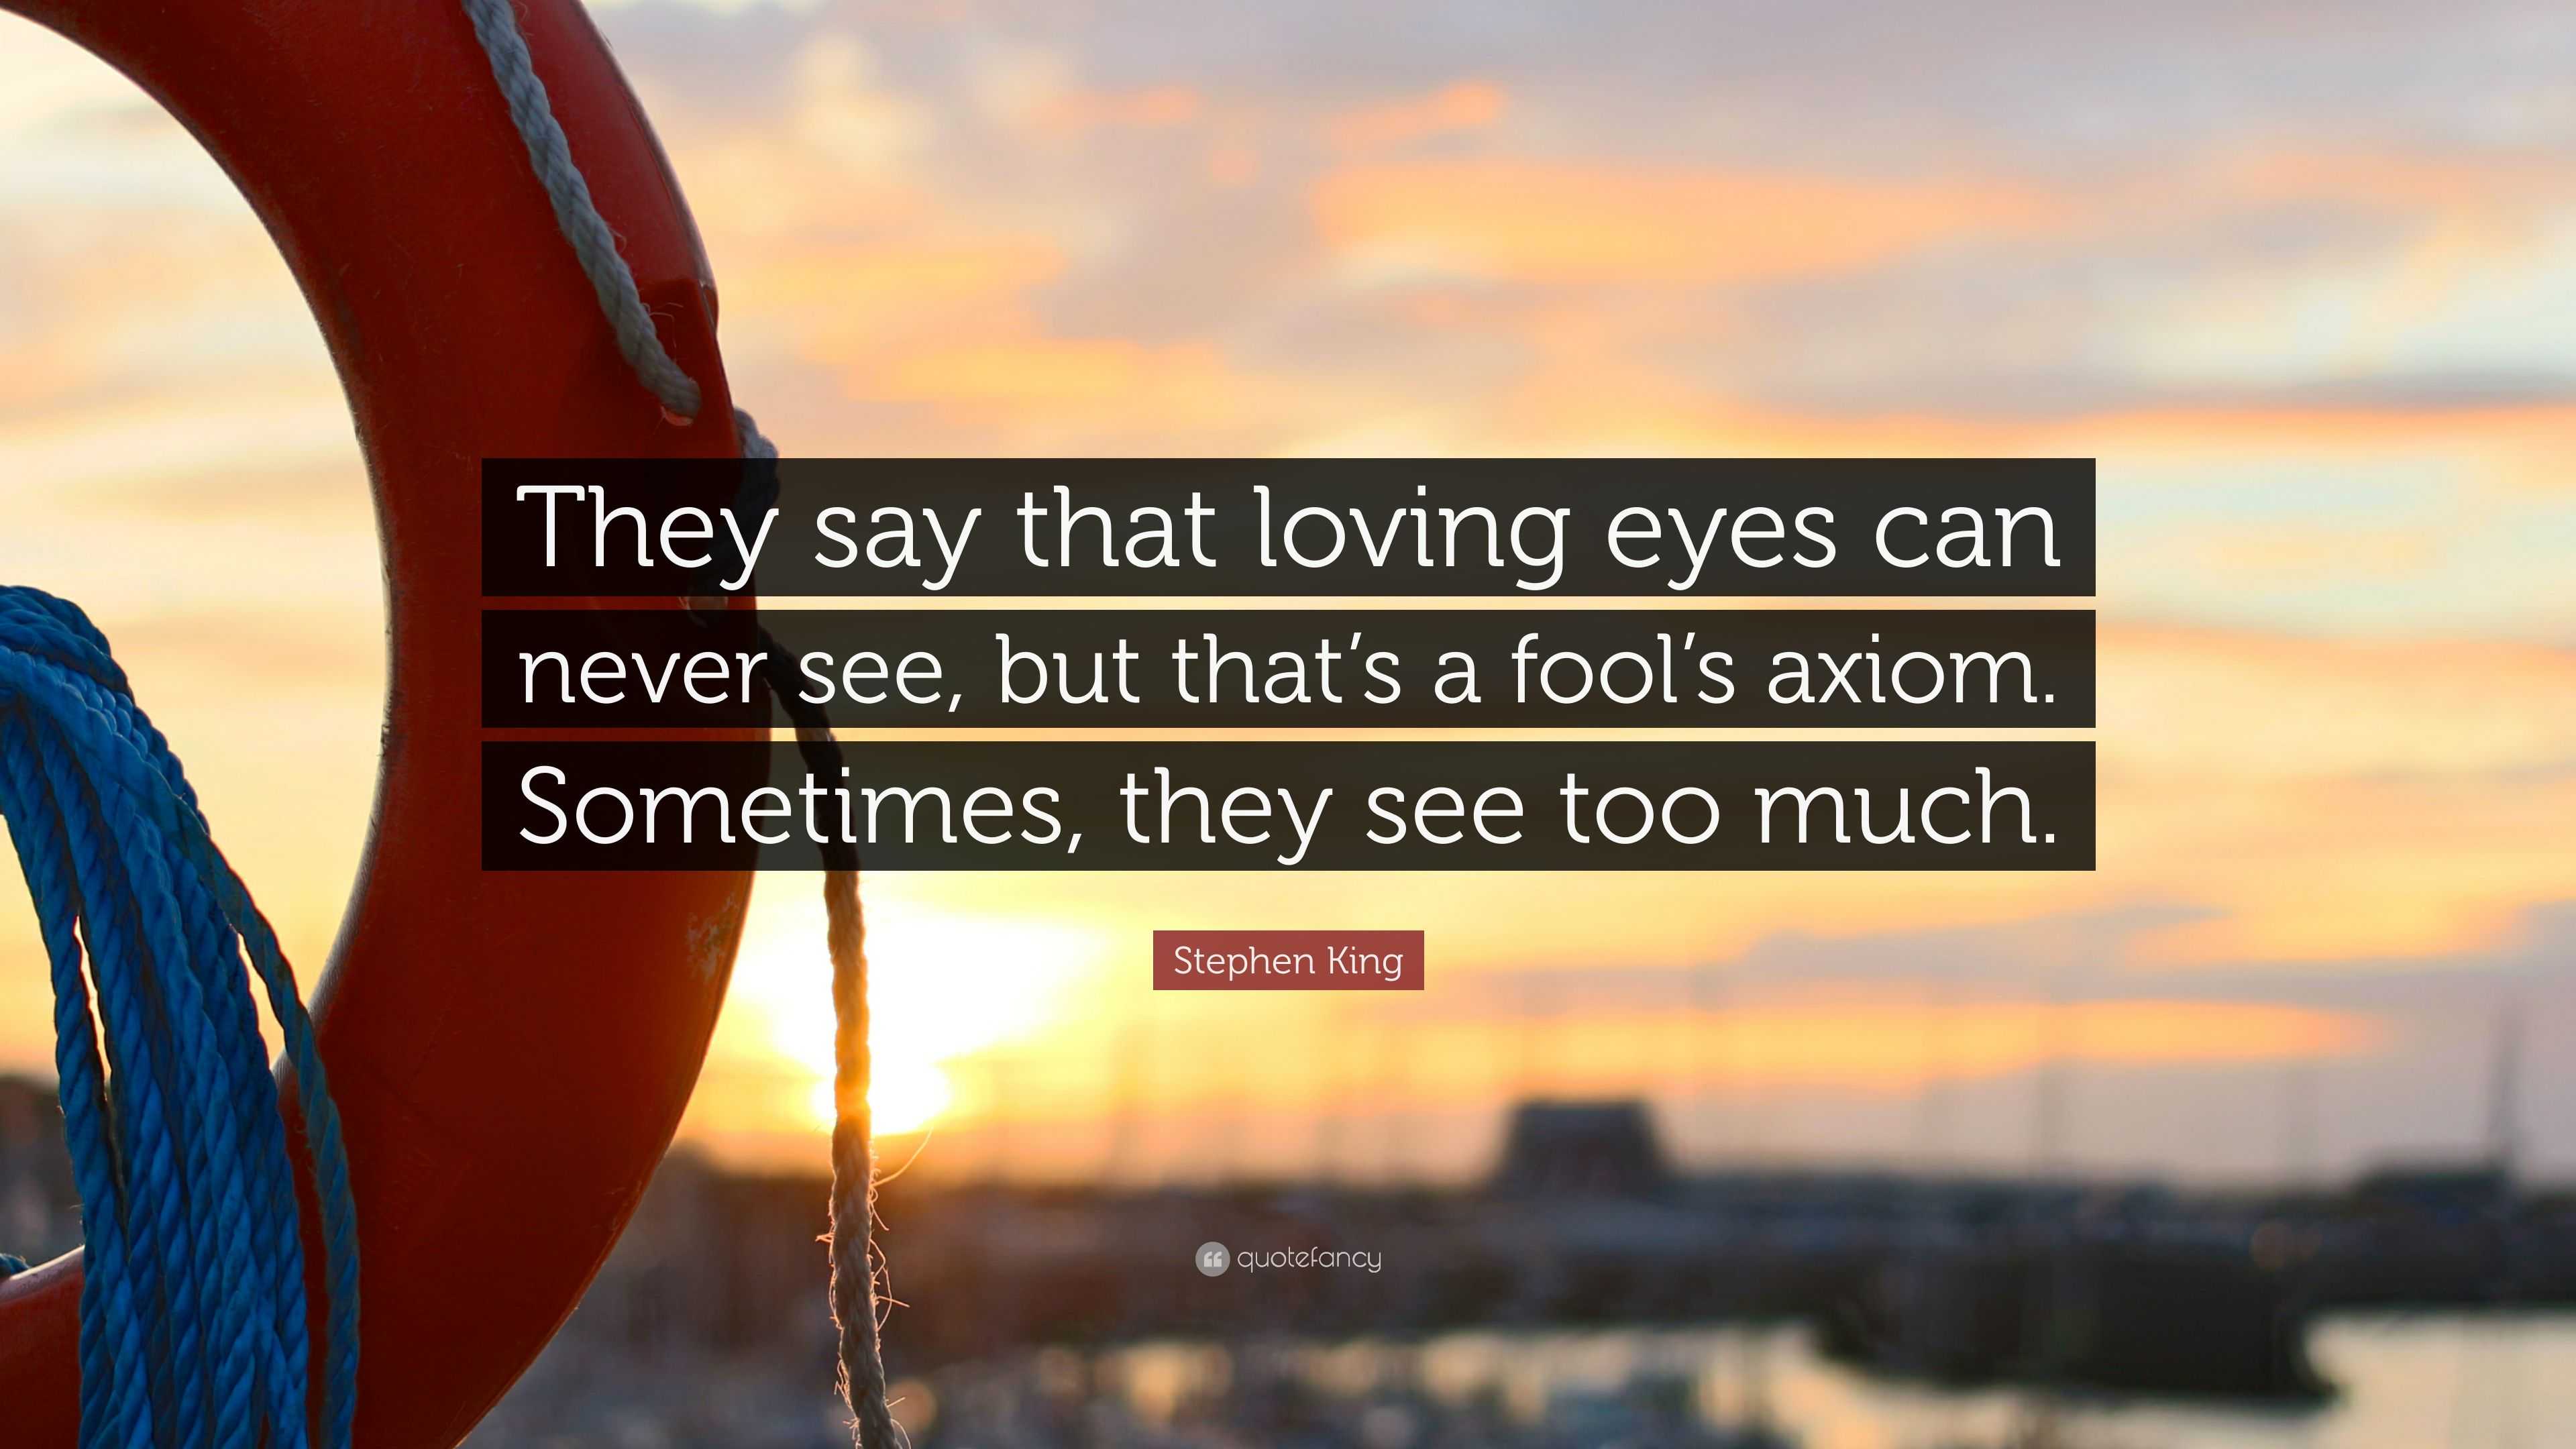 Stephen King Quote “They say that loving eyes can never see but that s